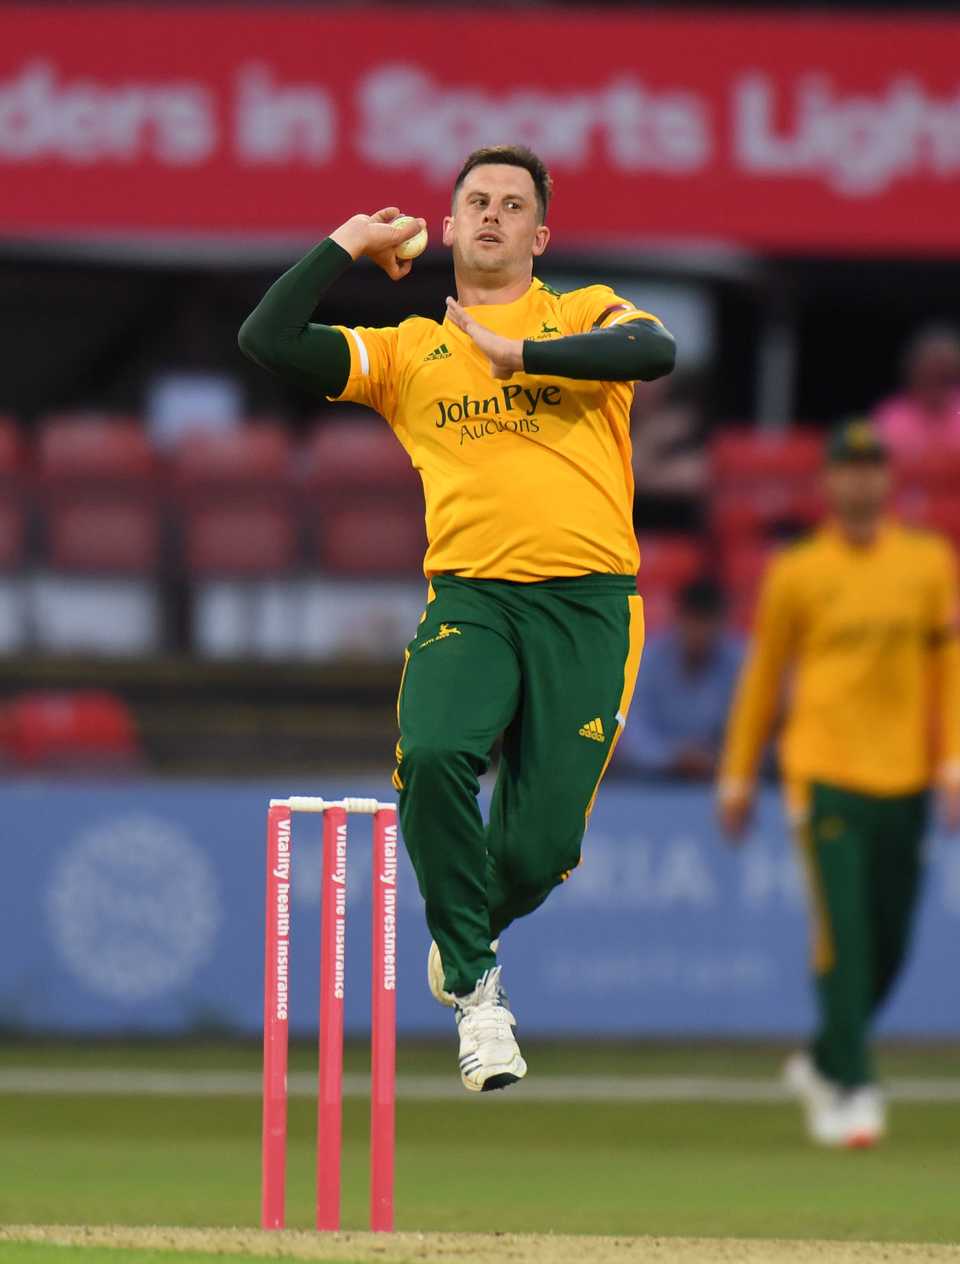 Steven Mullaney in his bowling action, Nottinghamshire vs Leicestershire, Vitality Blast, July 1, 2021